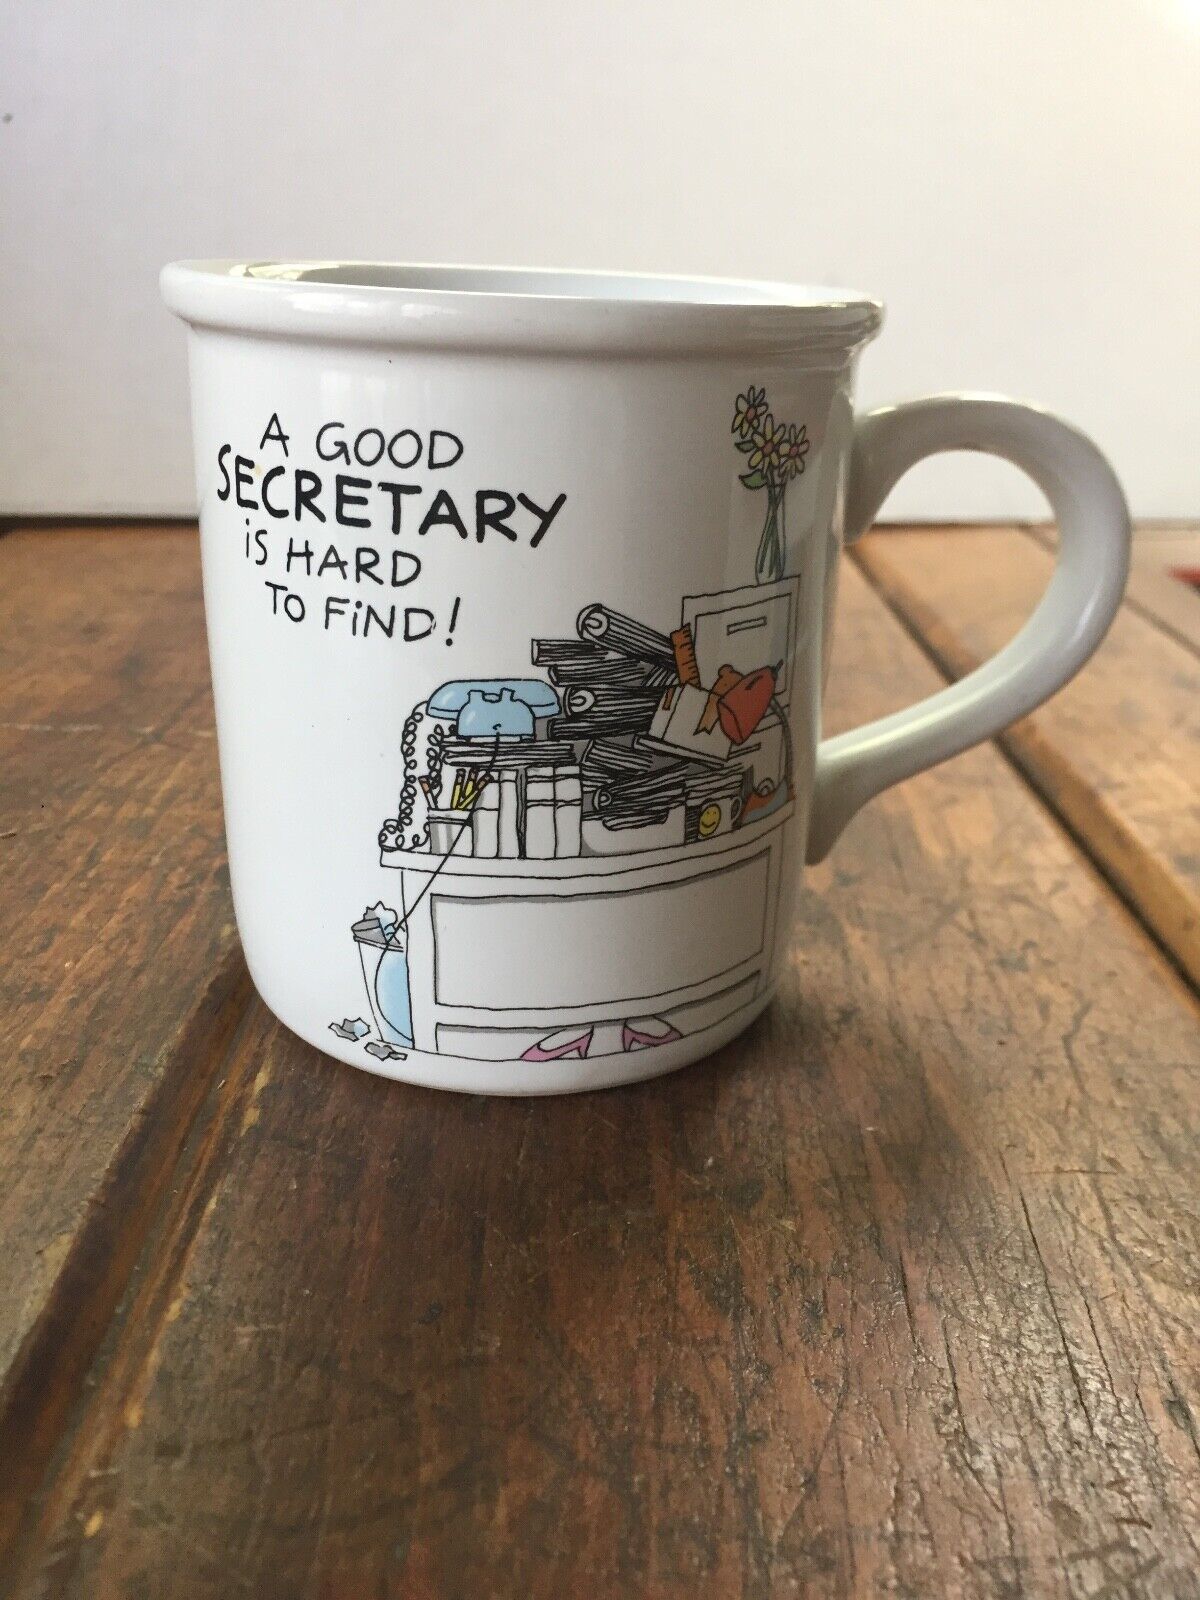 *HILARIOUS* A Good Secretary is Hard to Find Coffee Cup Cocoa Mug FUNNY SILLY